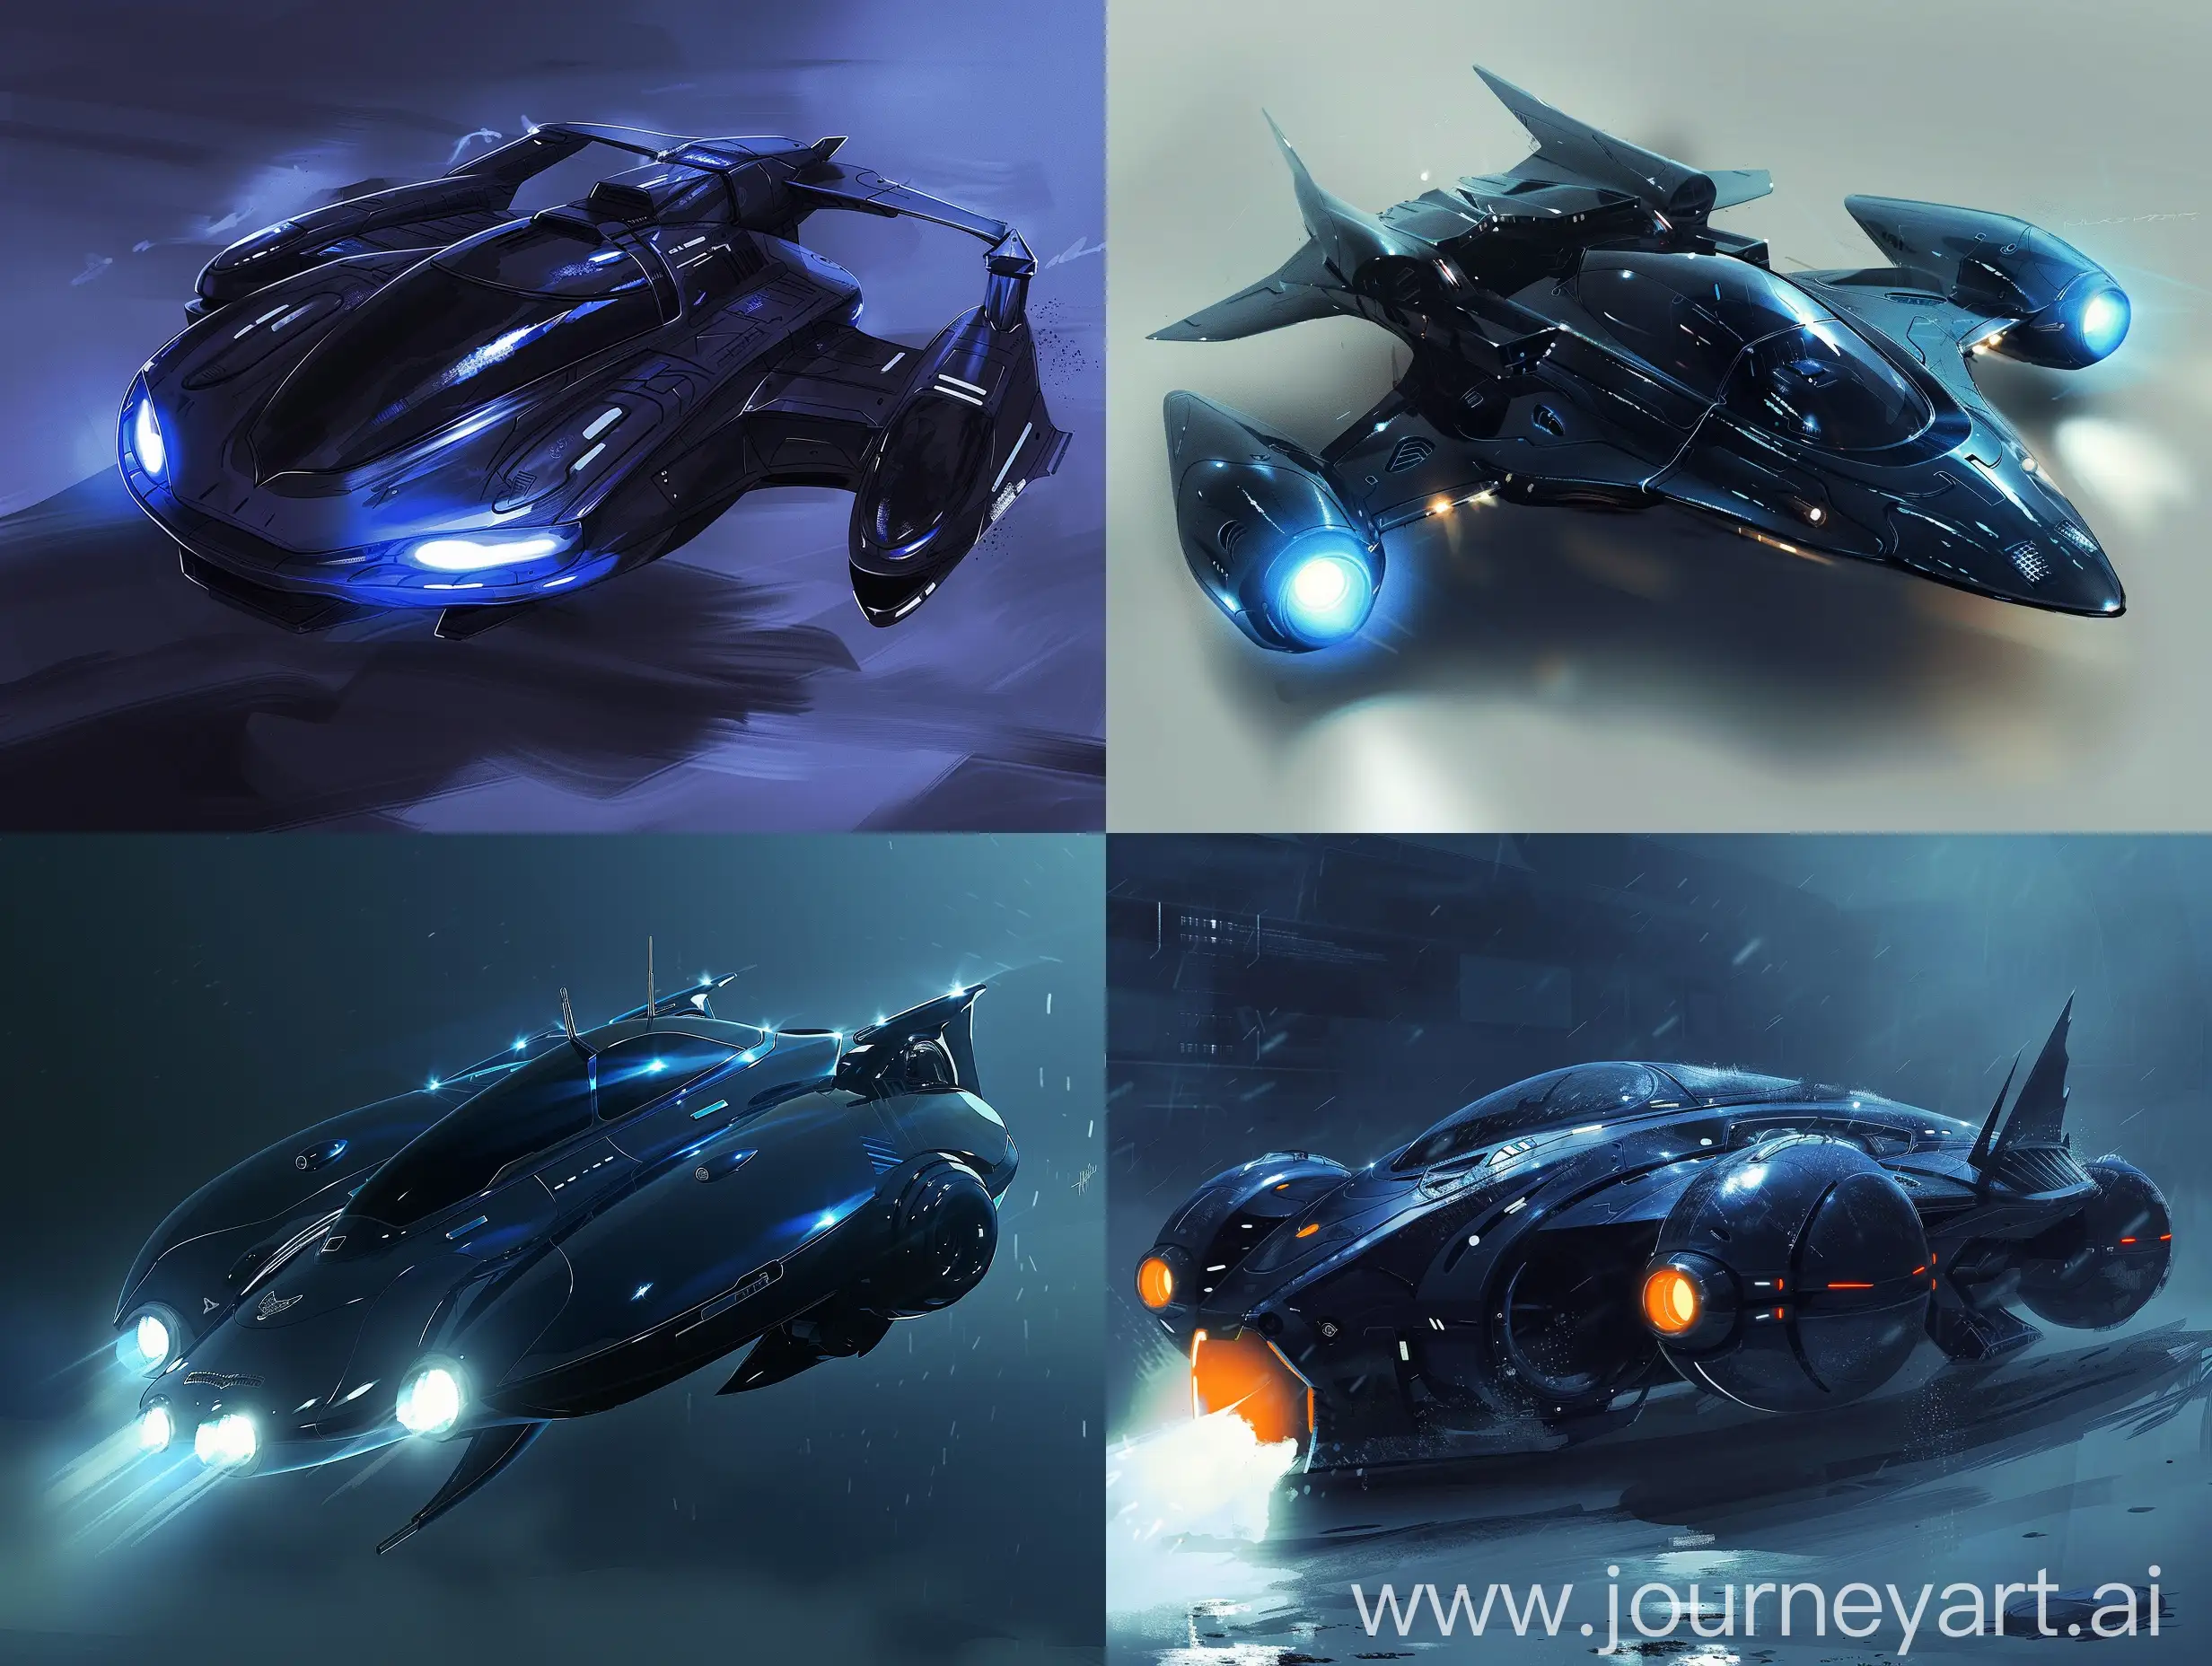 SciFi-Flying-Car-Concept-Sketch-Art-with-Dark-Blue-Coloring-and-Separated-Headlights